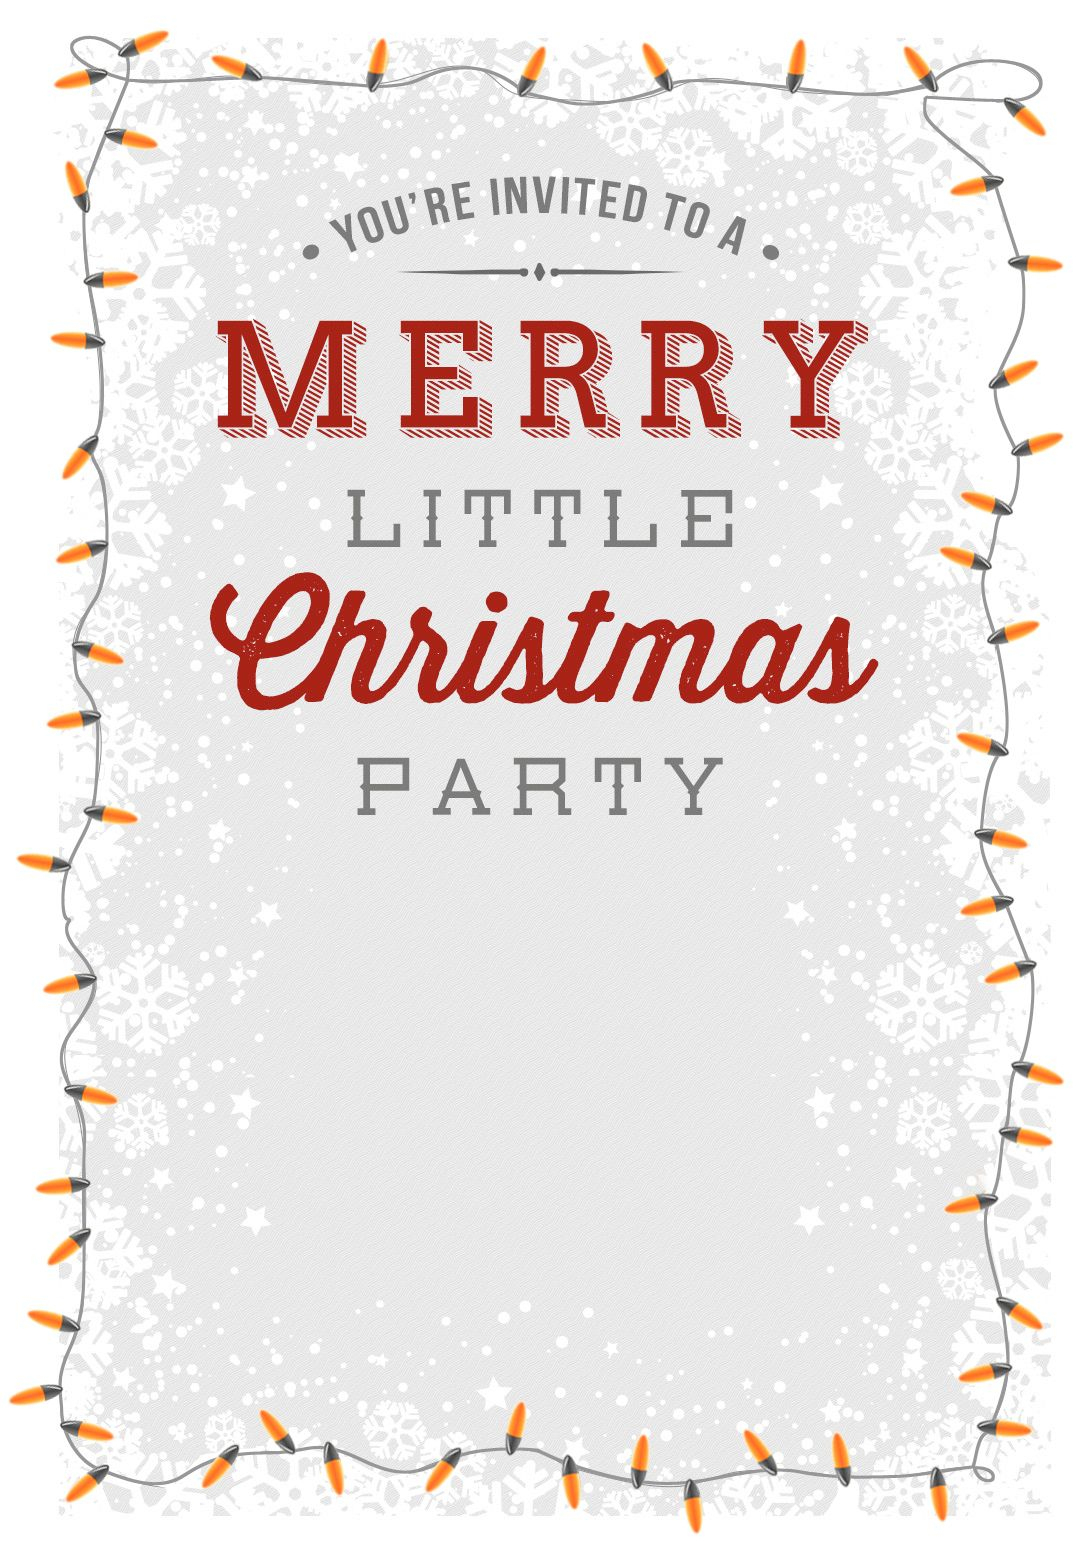 A Merry Little Party - Free Printable Christmas Invitation Template - Free Printable Christmas Party Invitations